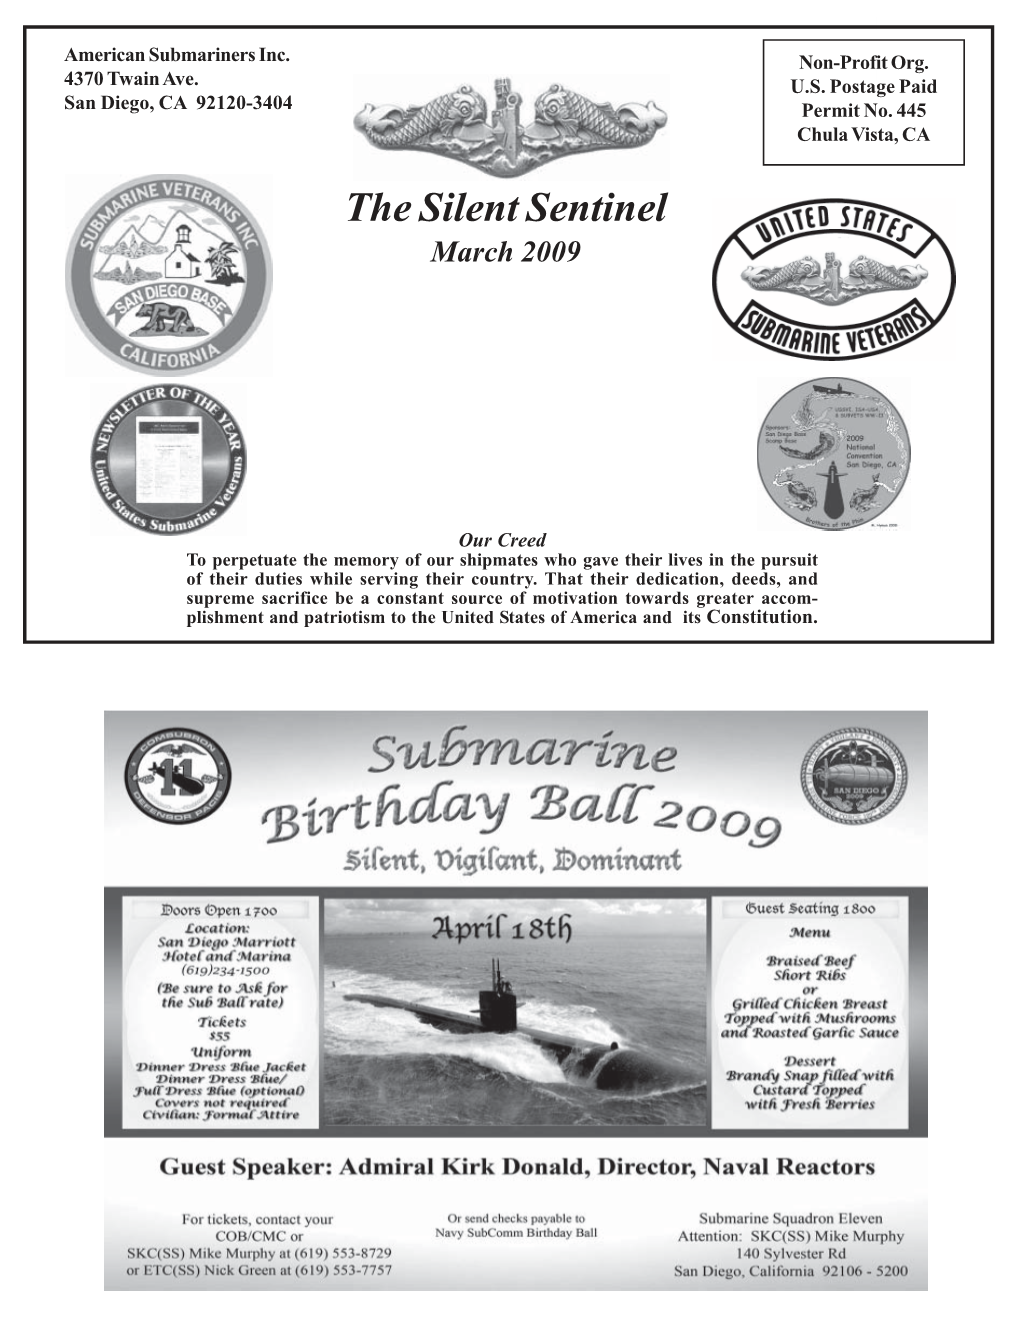 The Silent Sentinel March 2009 Page 1 American Submariners Inc